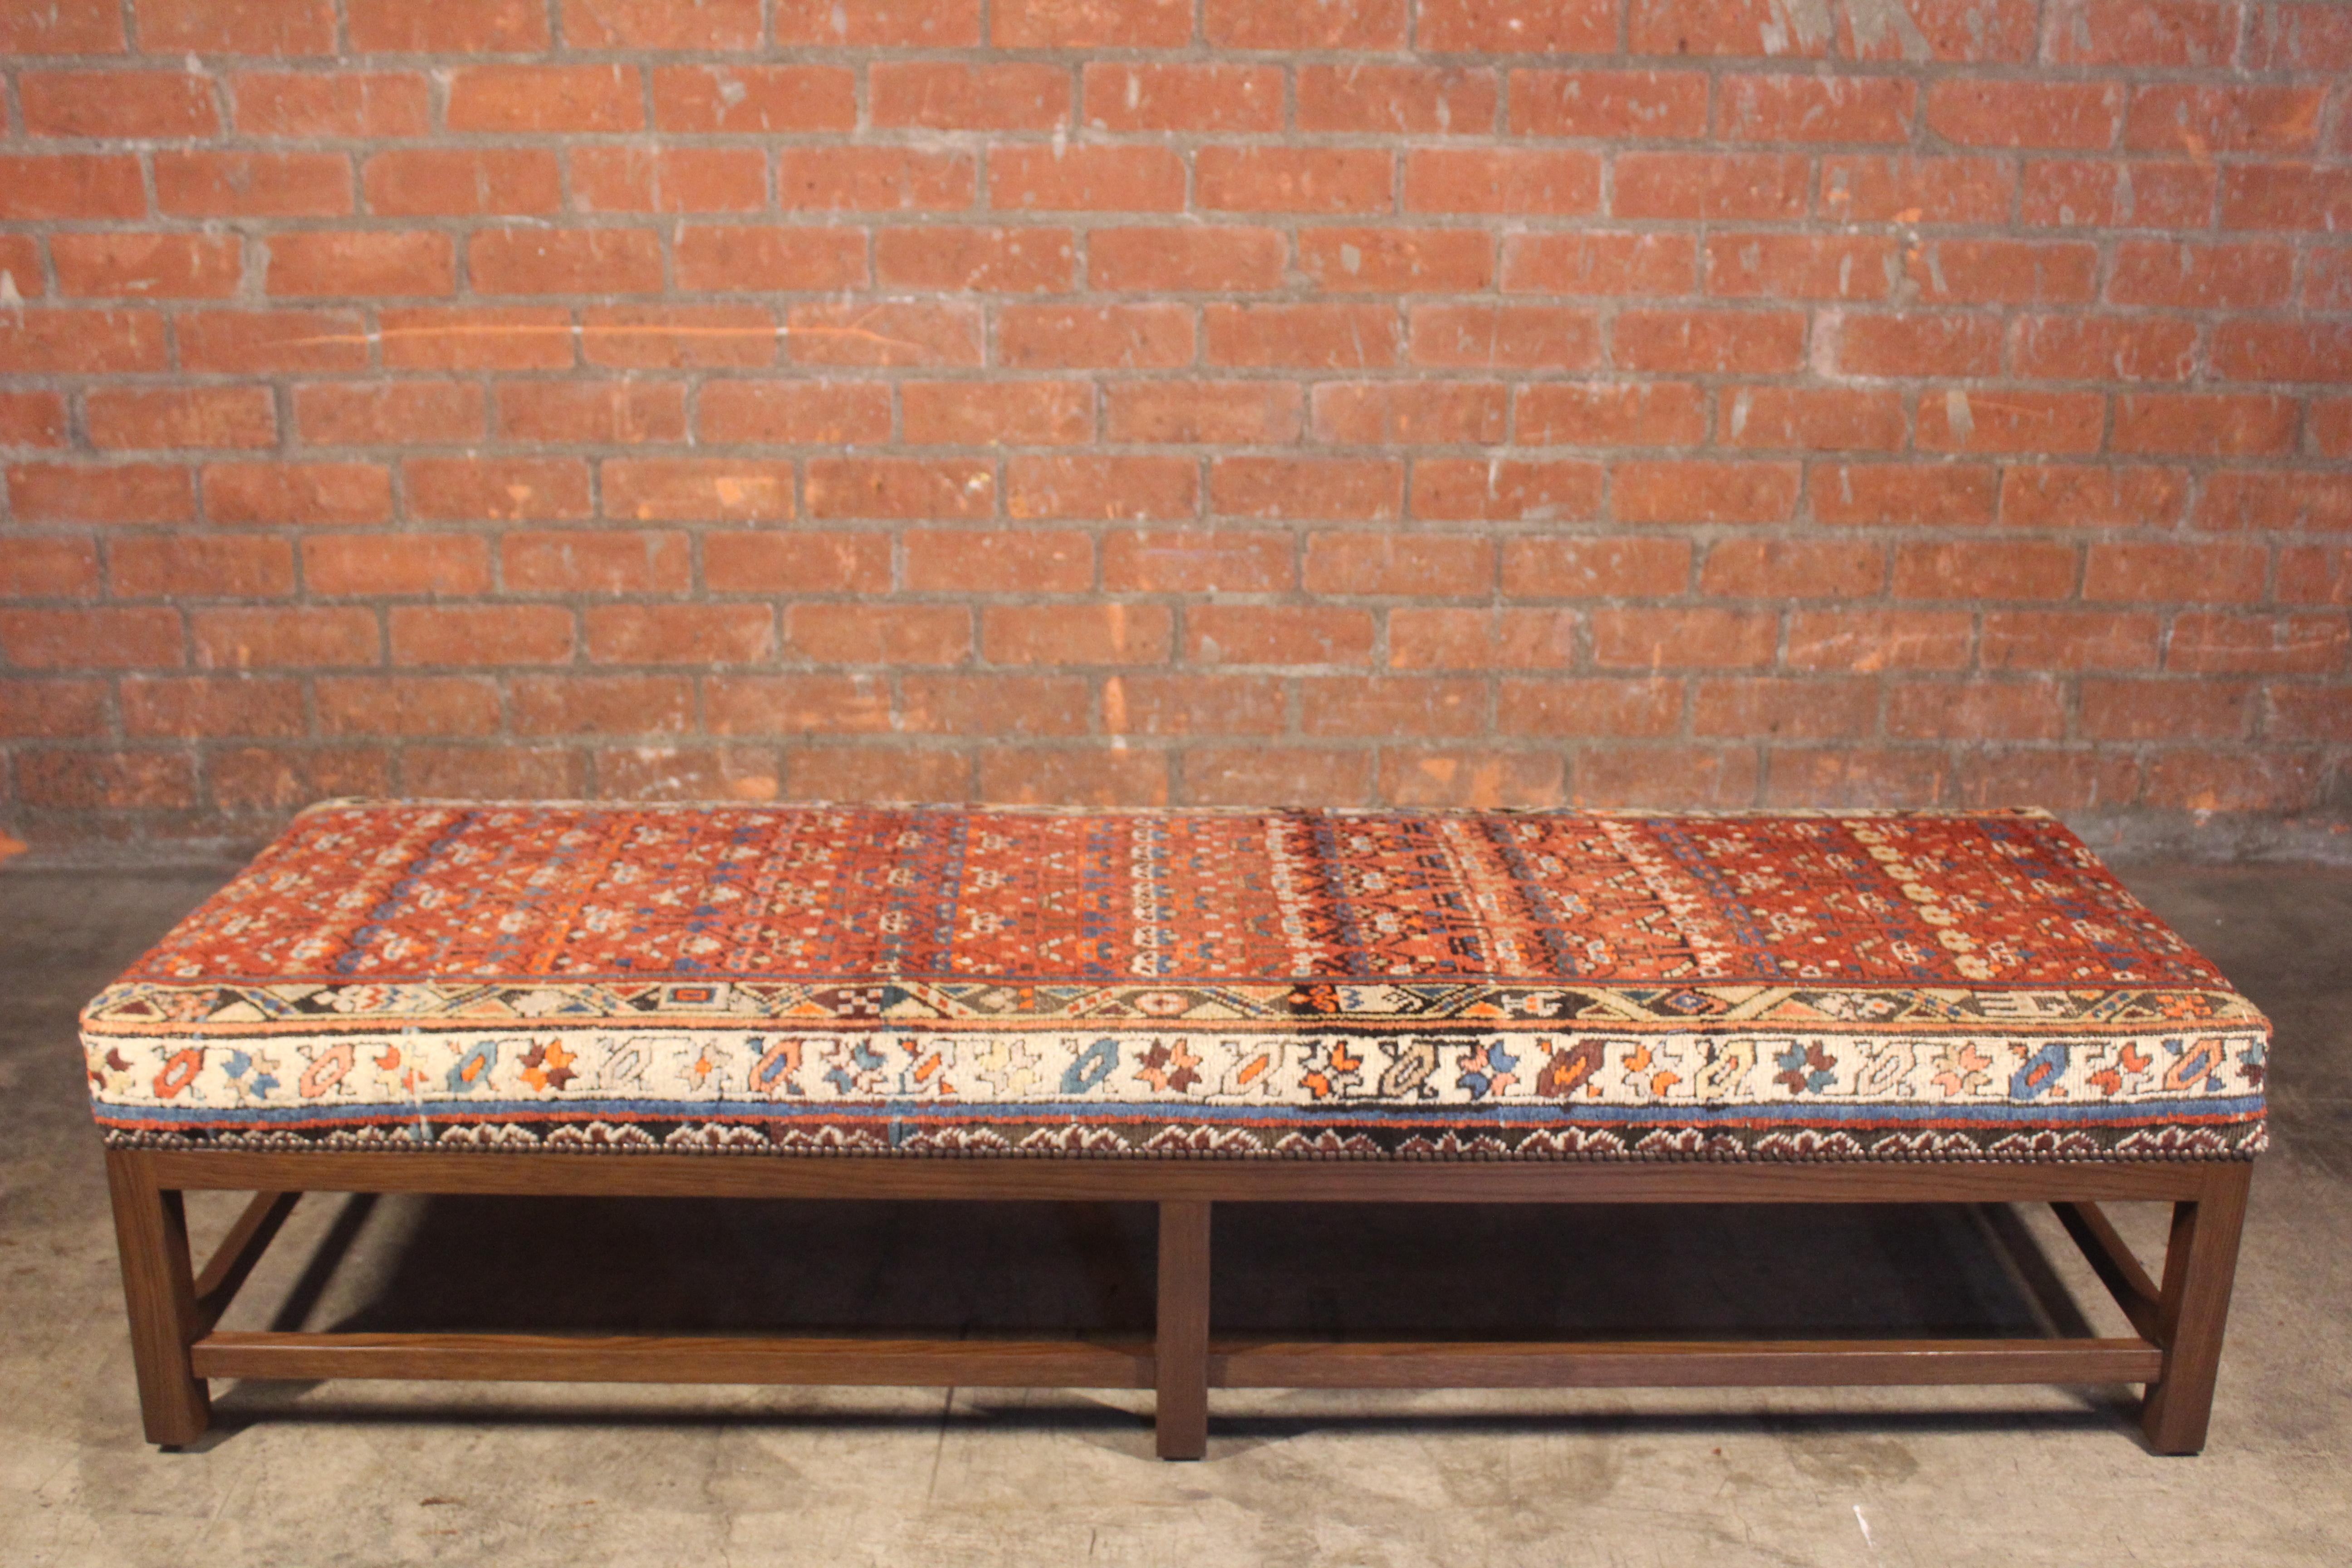 American Lexington Ottoman or Bench Upholstered in a Vintage Turkish Rug